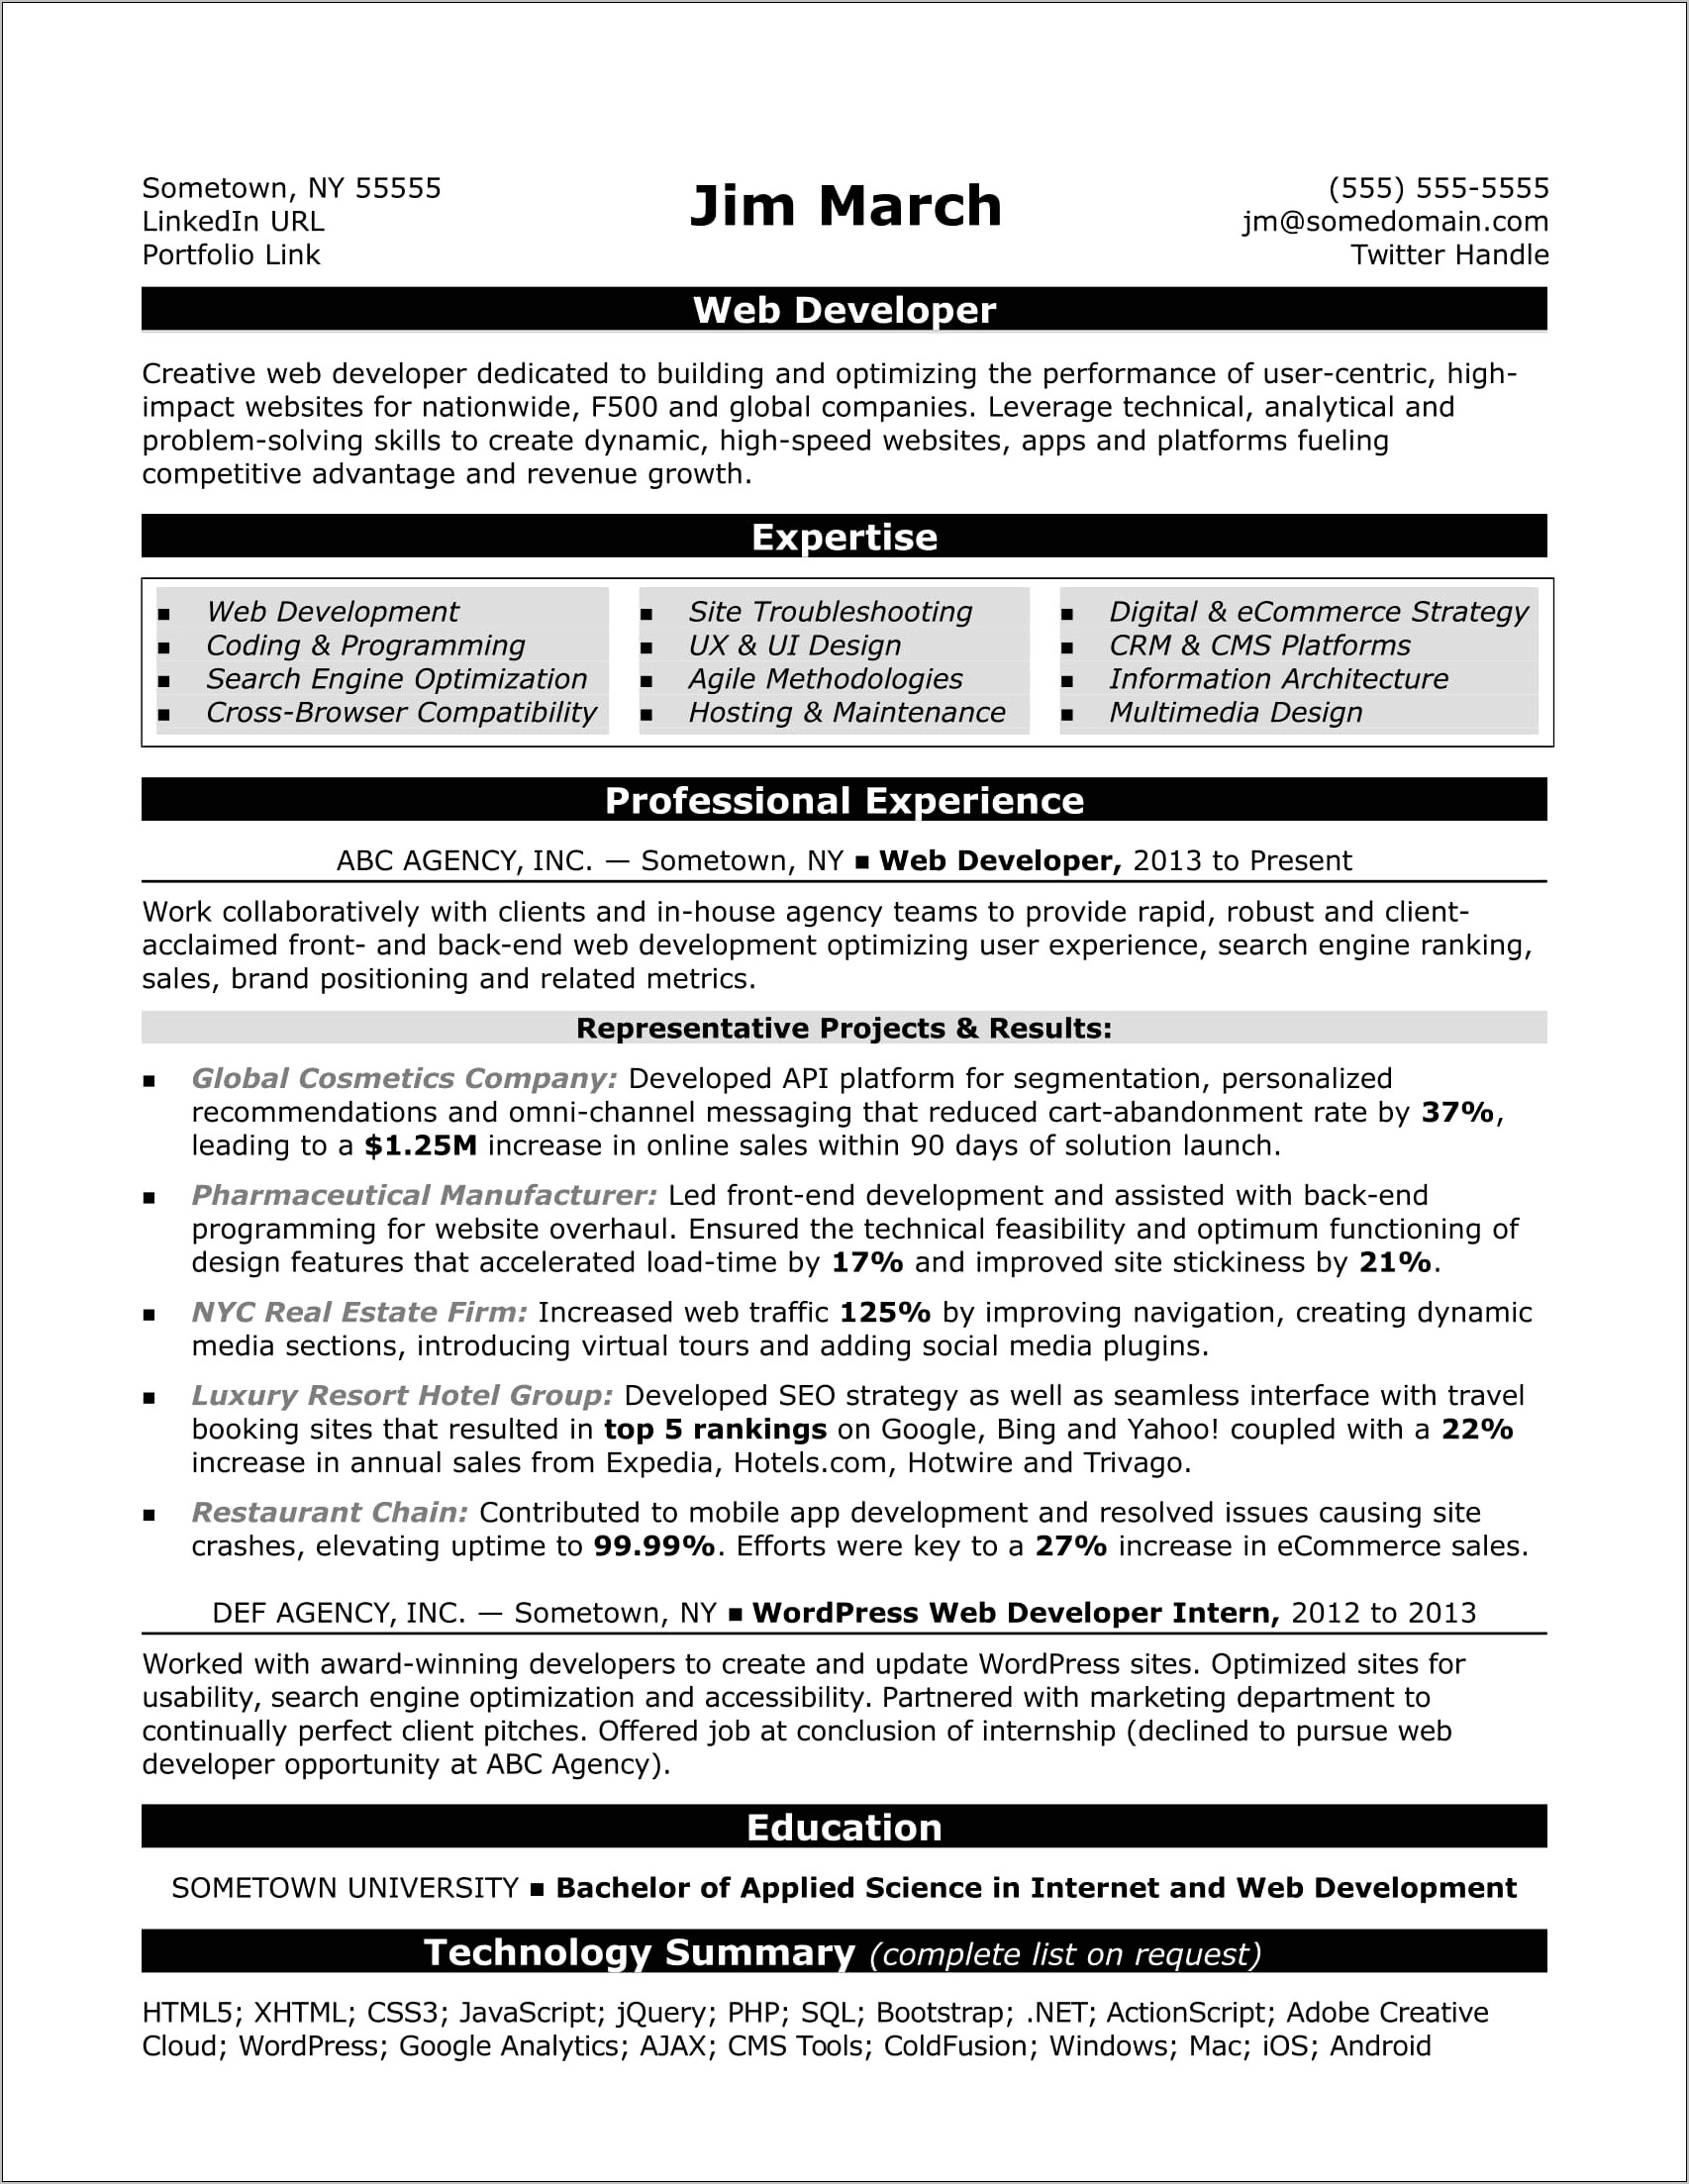 Create A Summary Of Qualifications For A Resumé